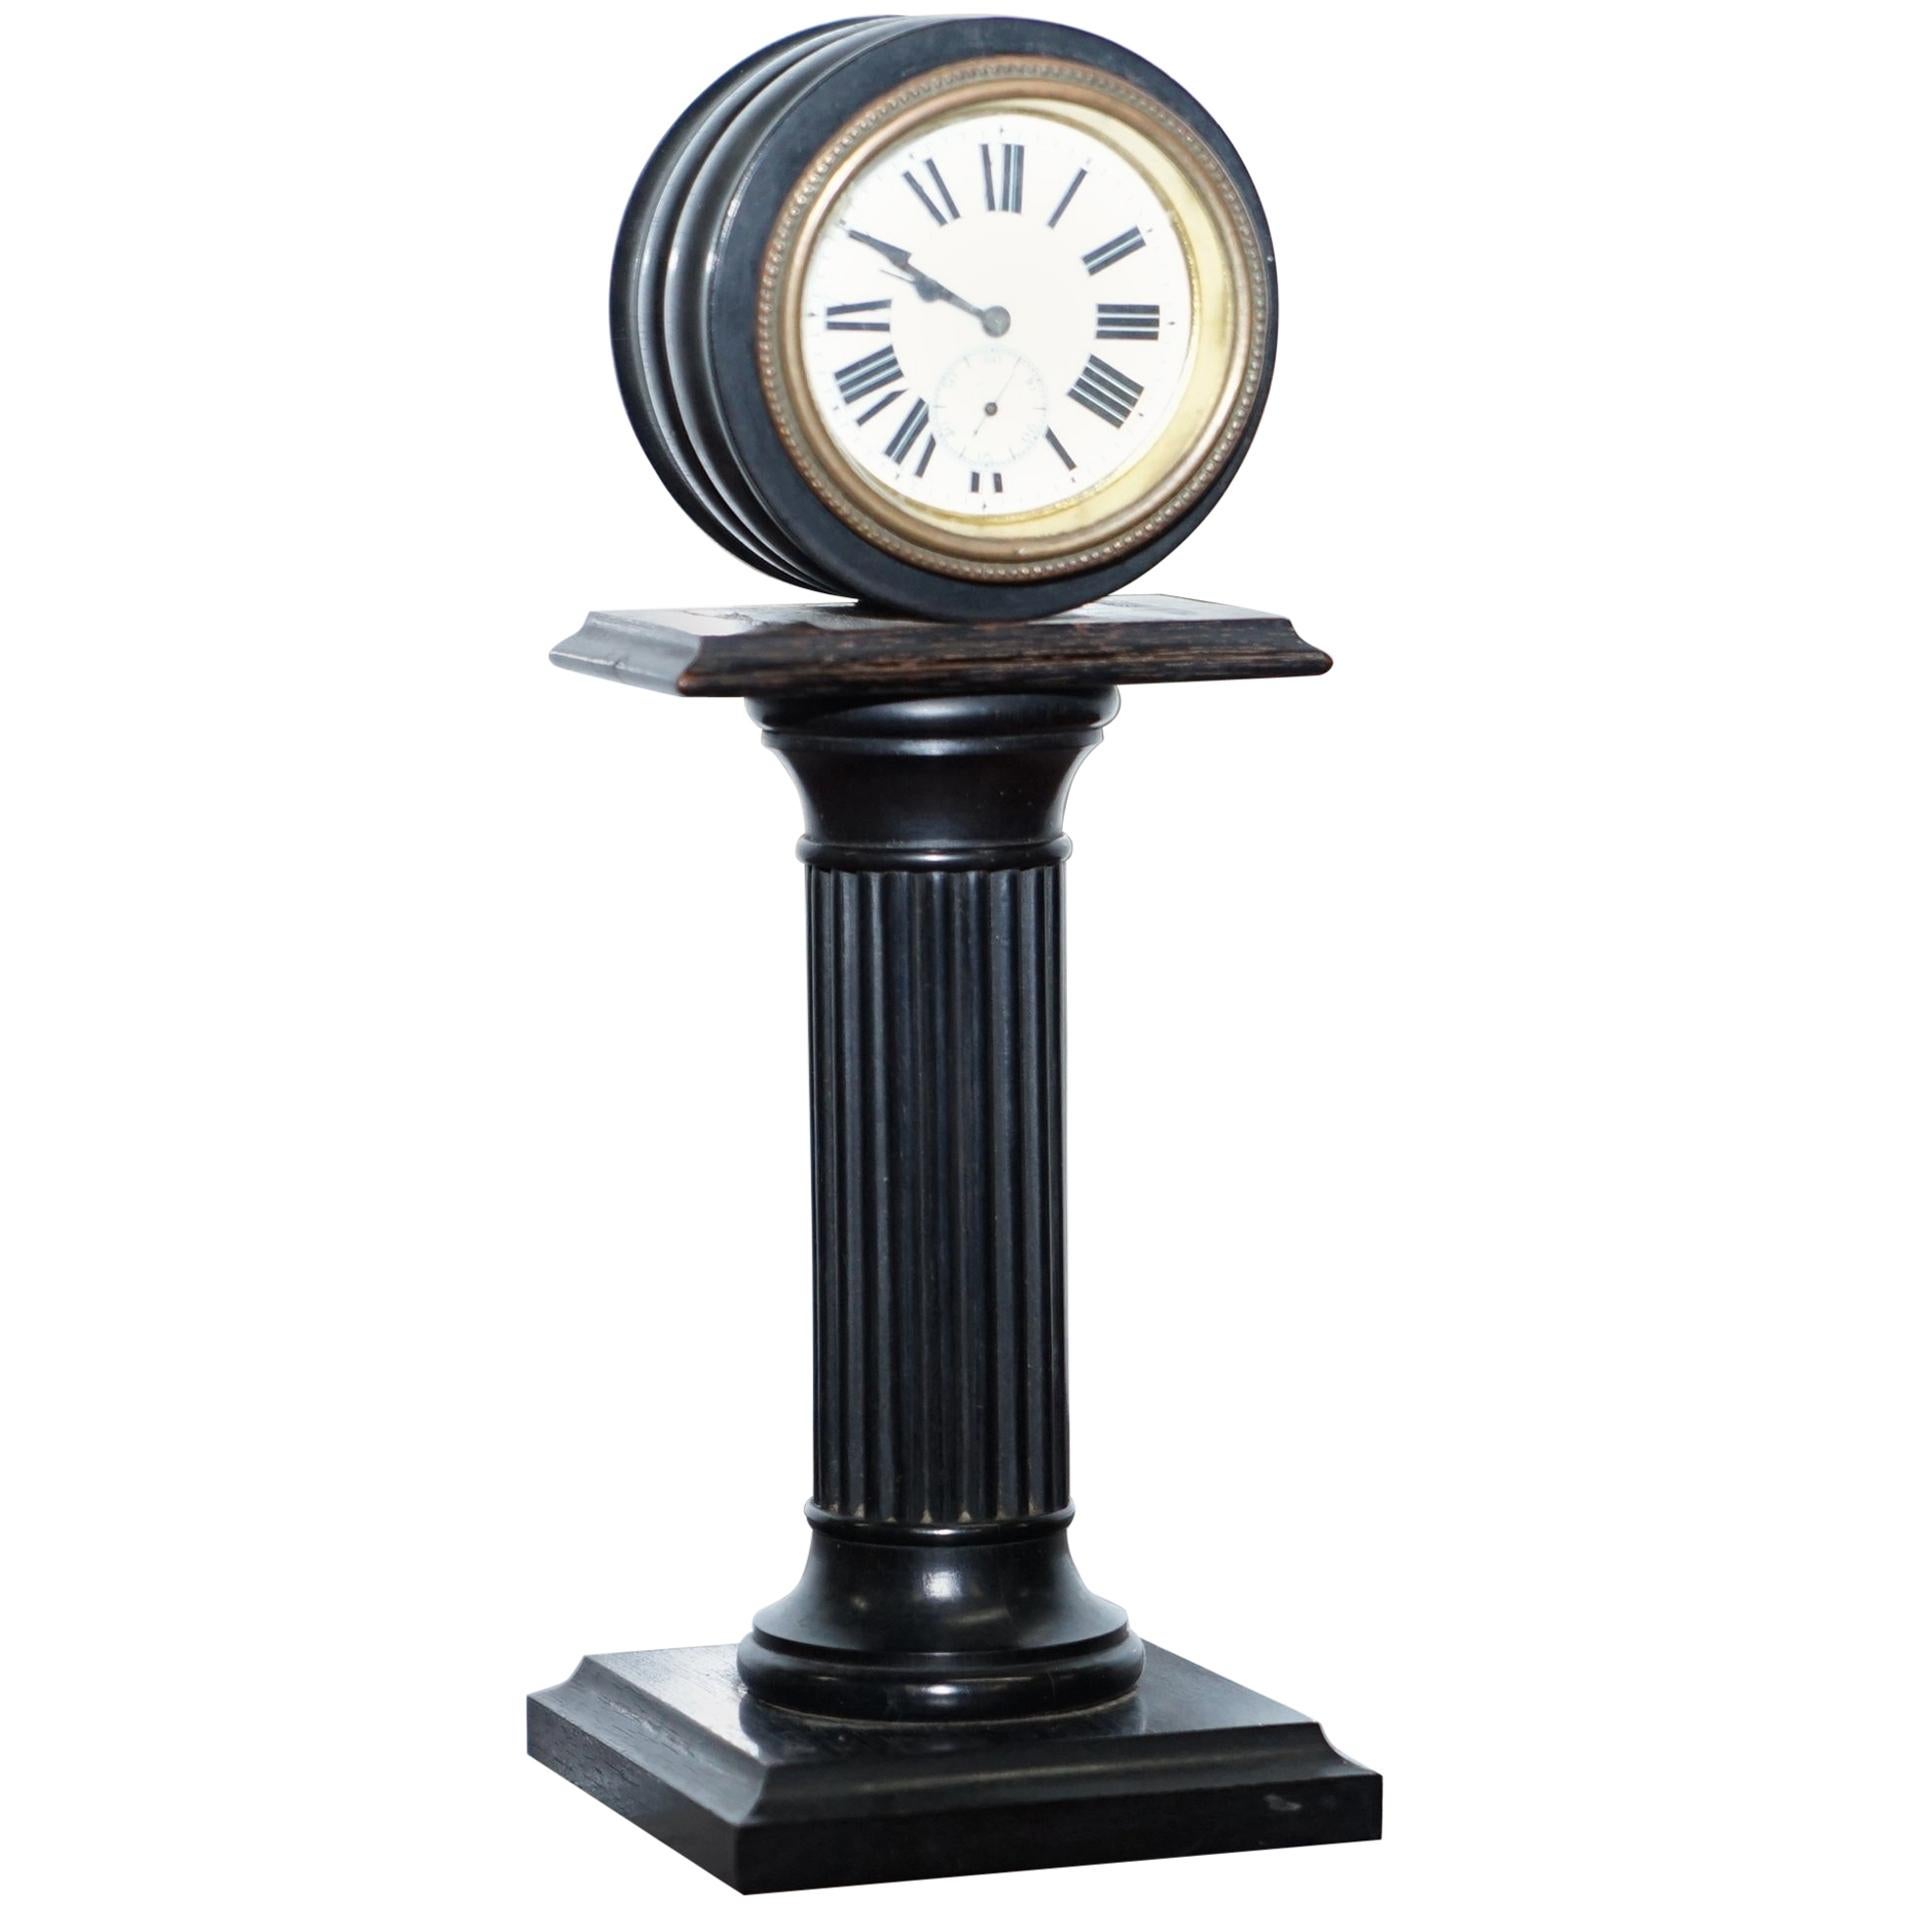 19th Century Mantle Clock with Pedestal Column Base Hand-Painted Porcelain Dial